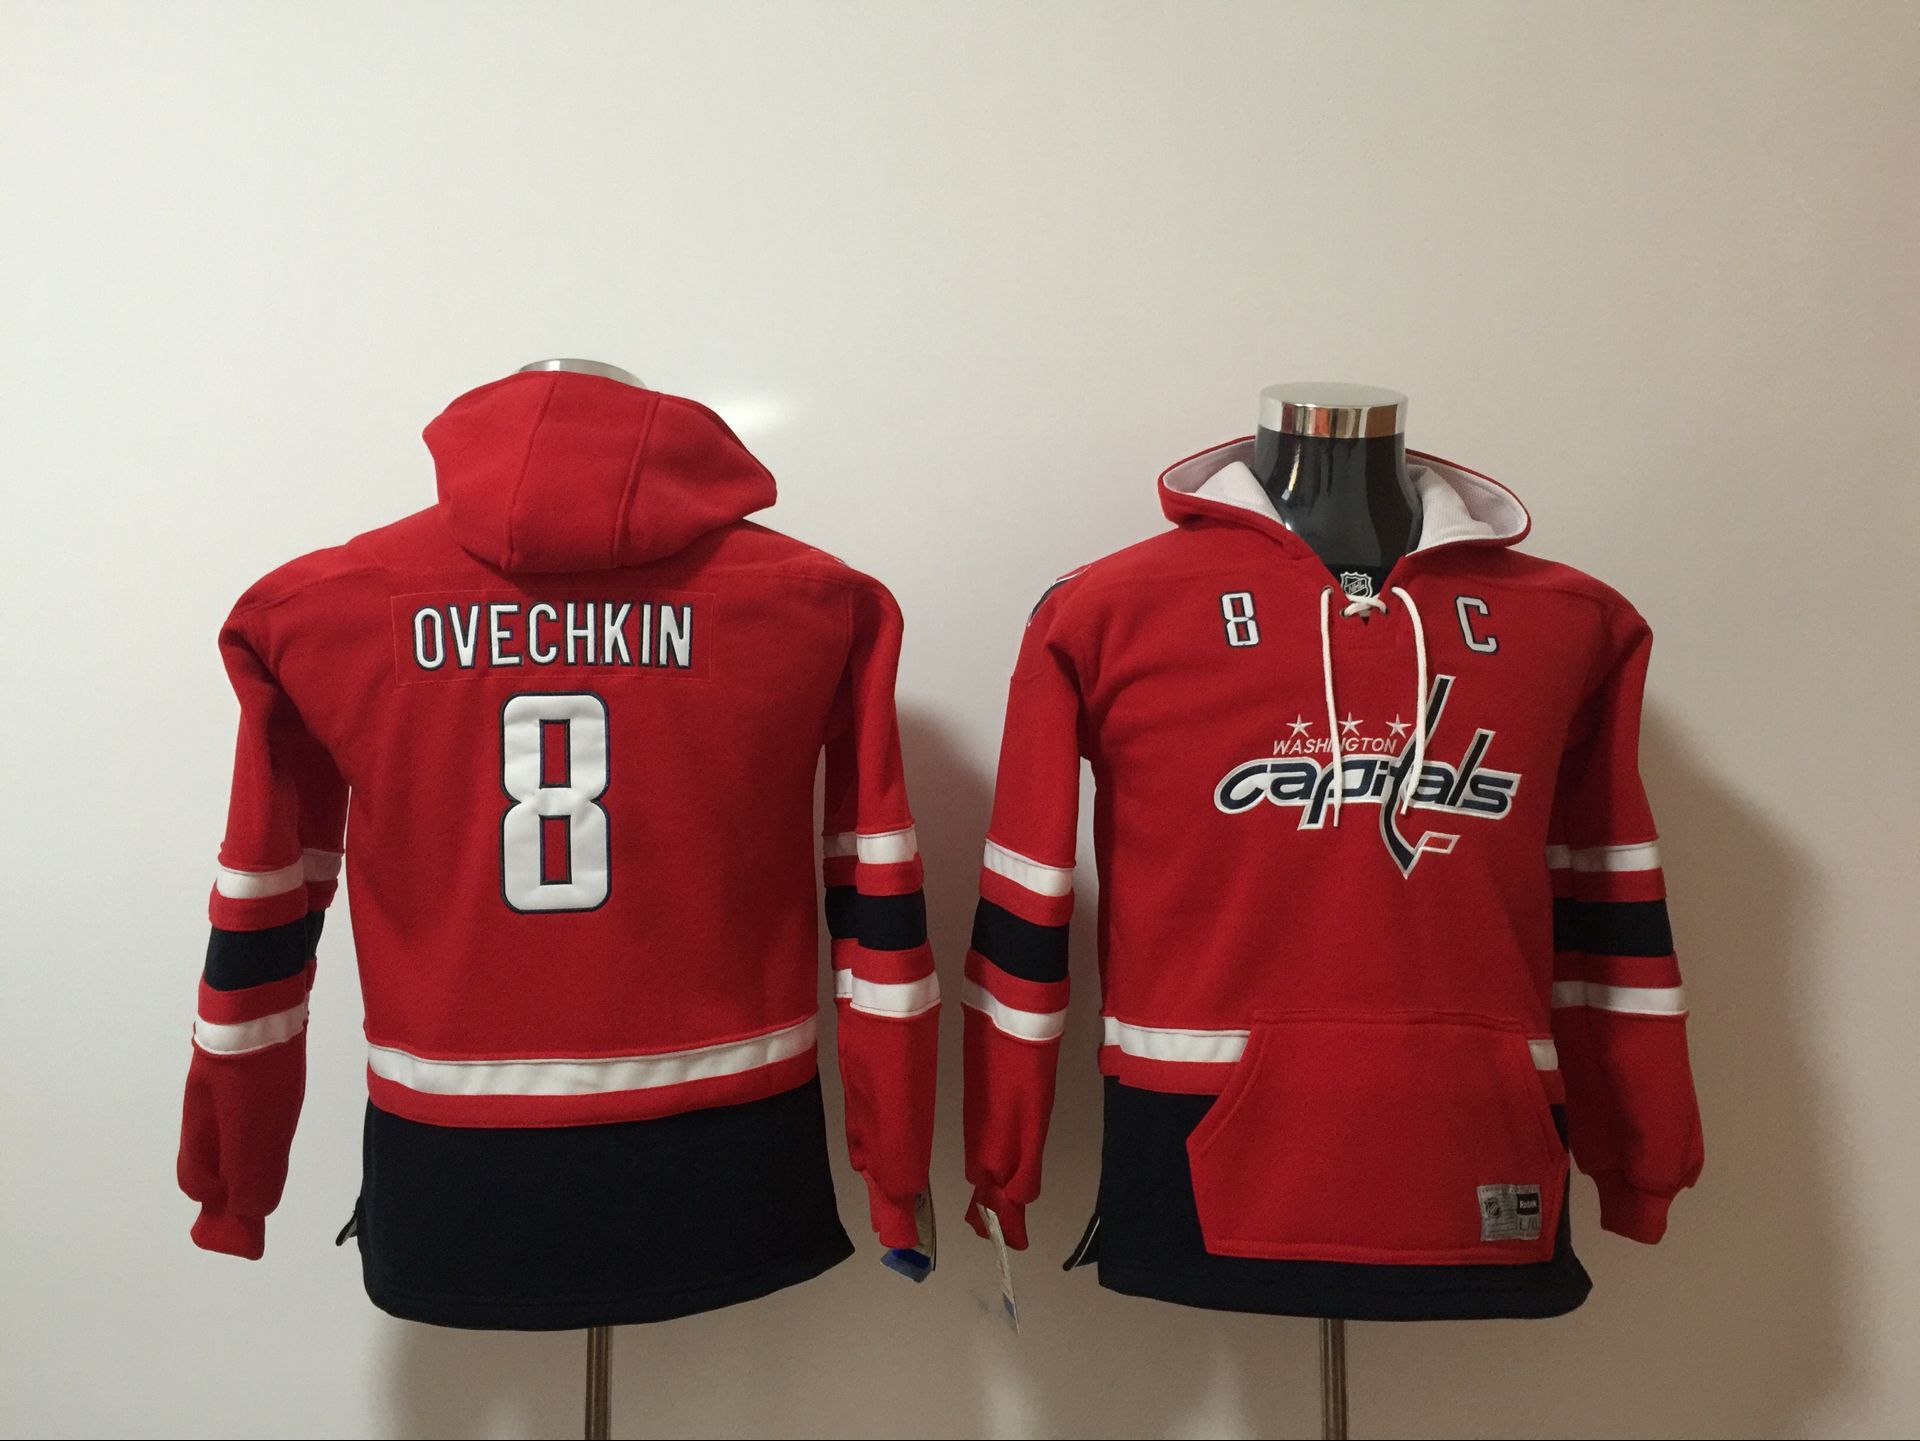 Youth 2017 NHL Washington Capitals #8 Ovechkin Red Hoodie->chicago bulls->NBA Jersey